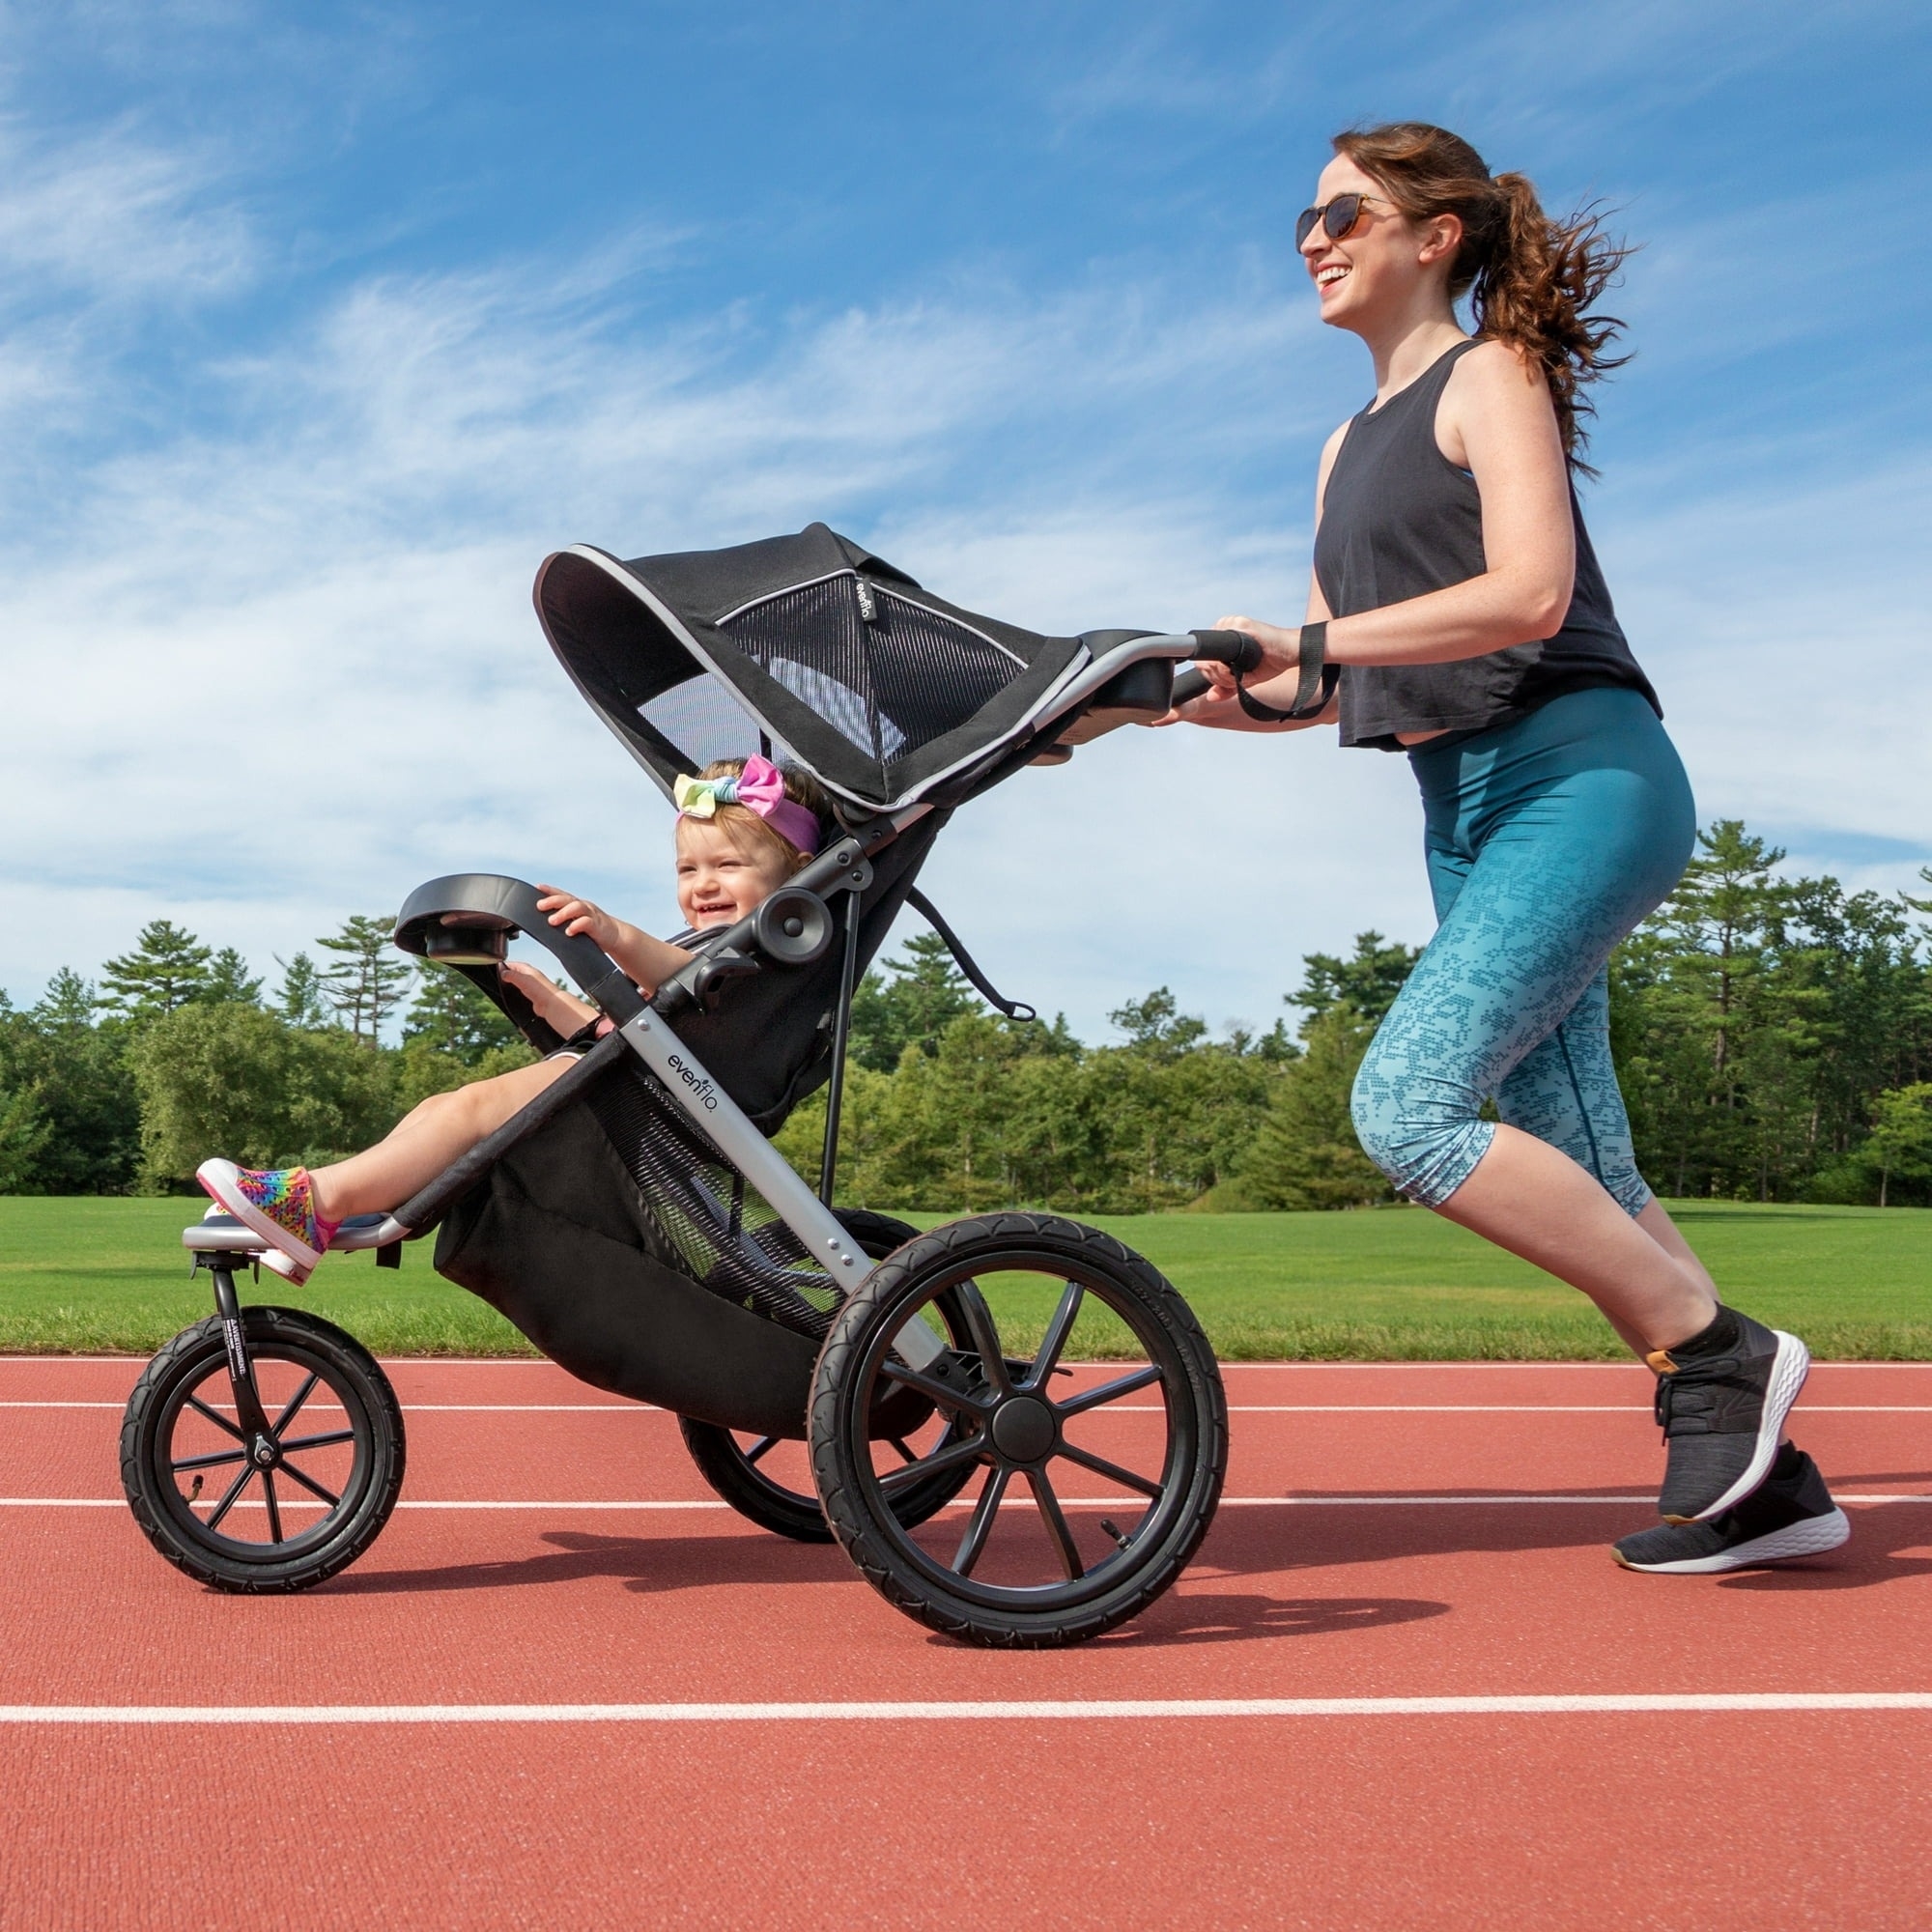 A woman pushes a child in a jogging stroller